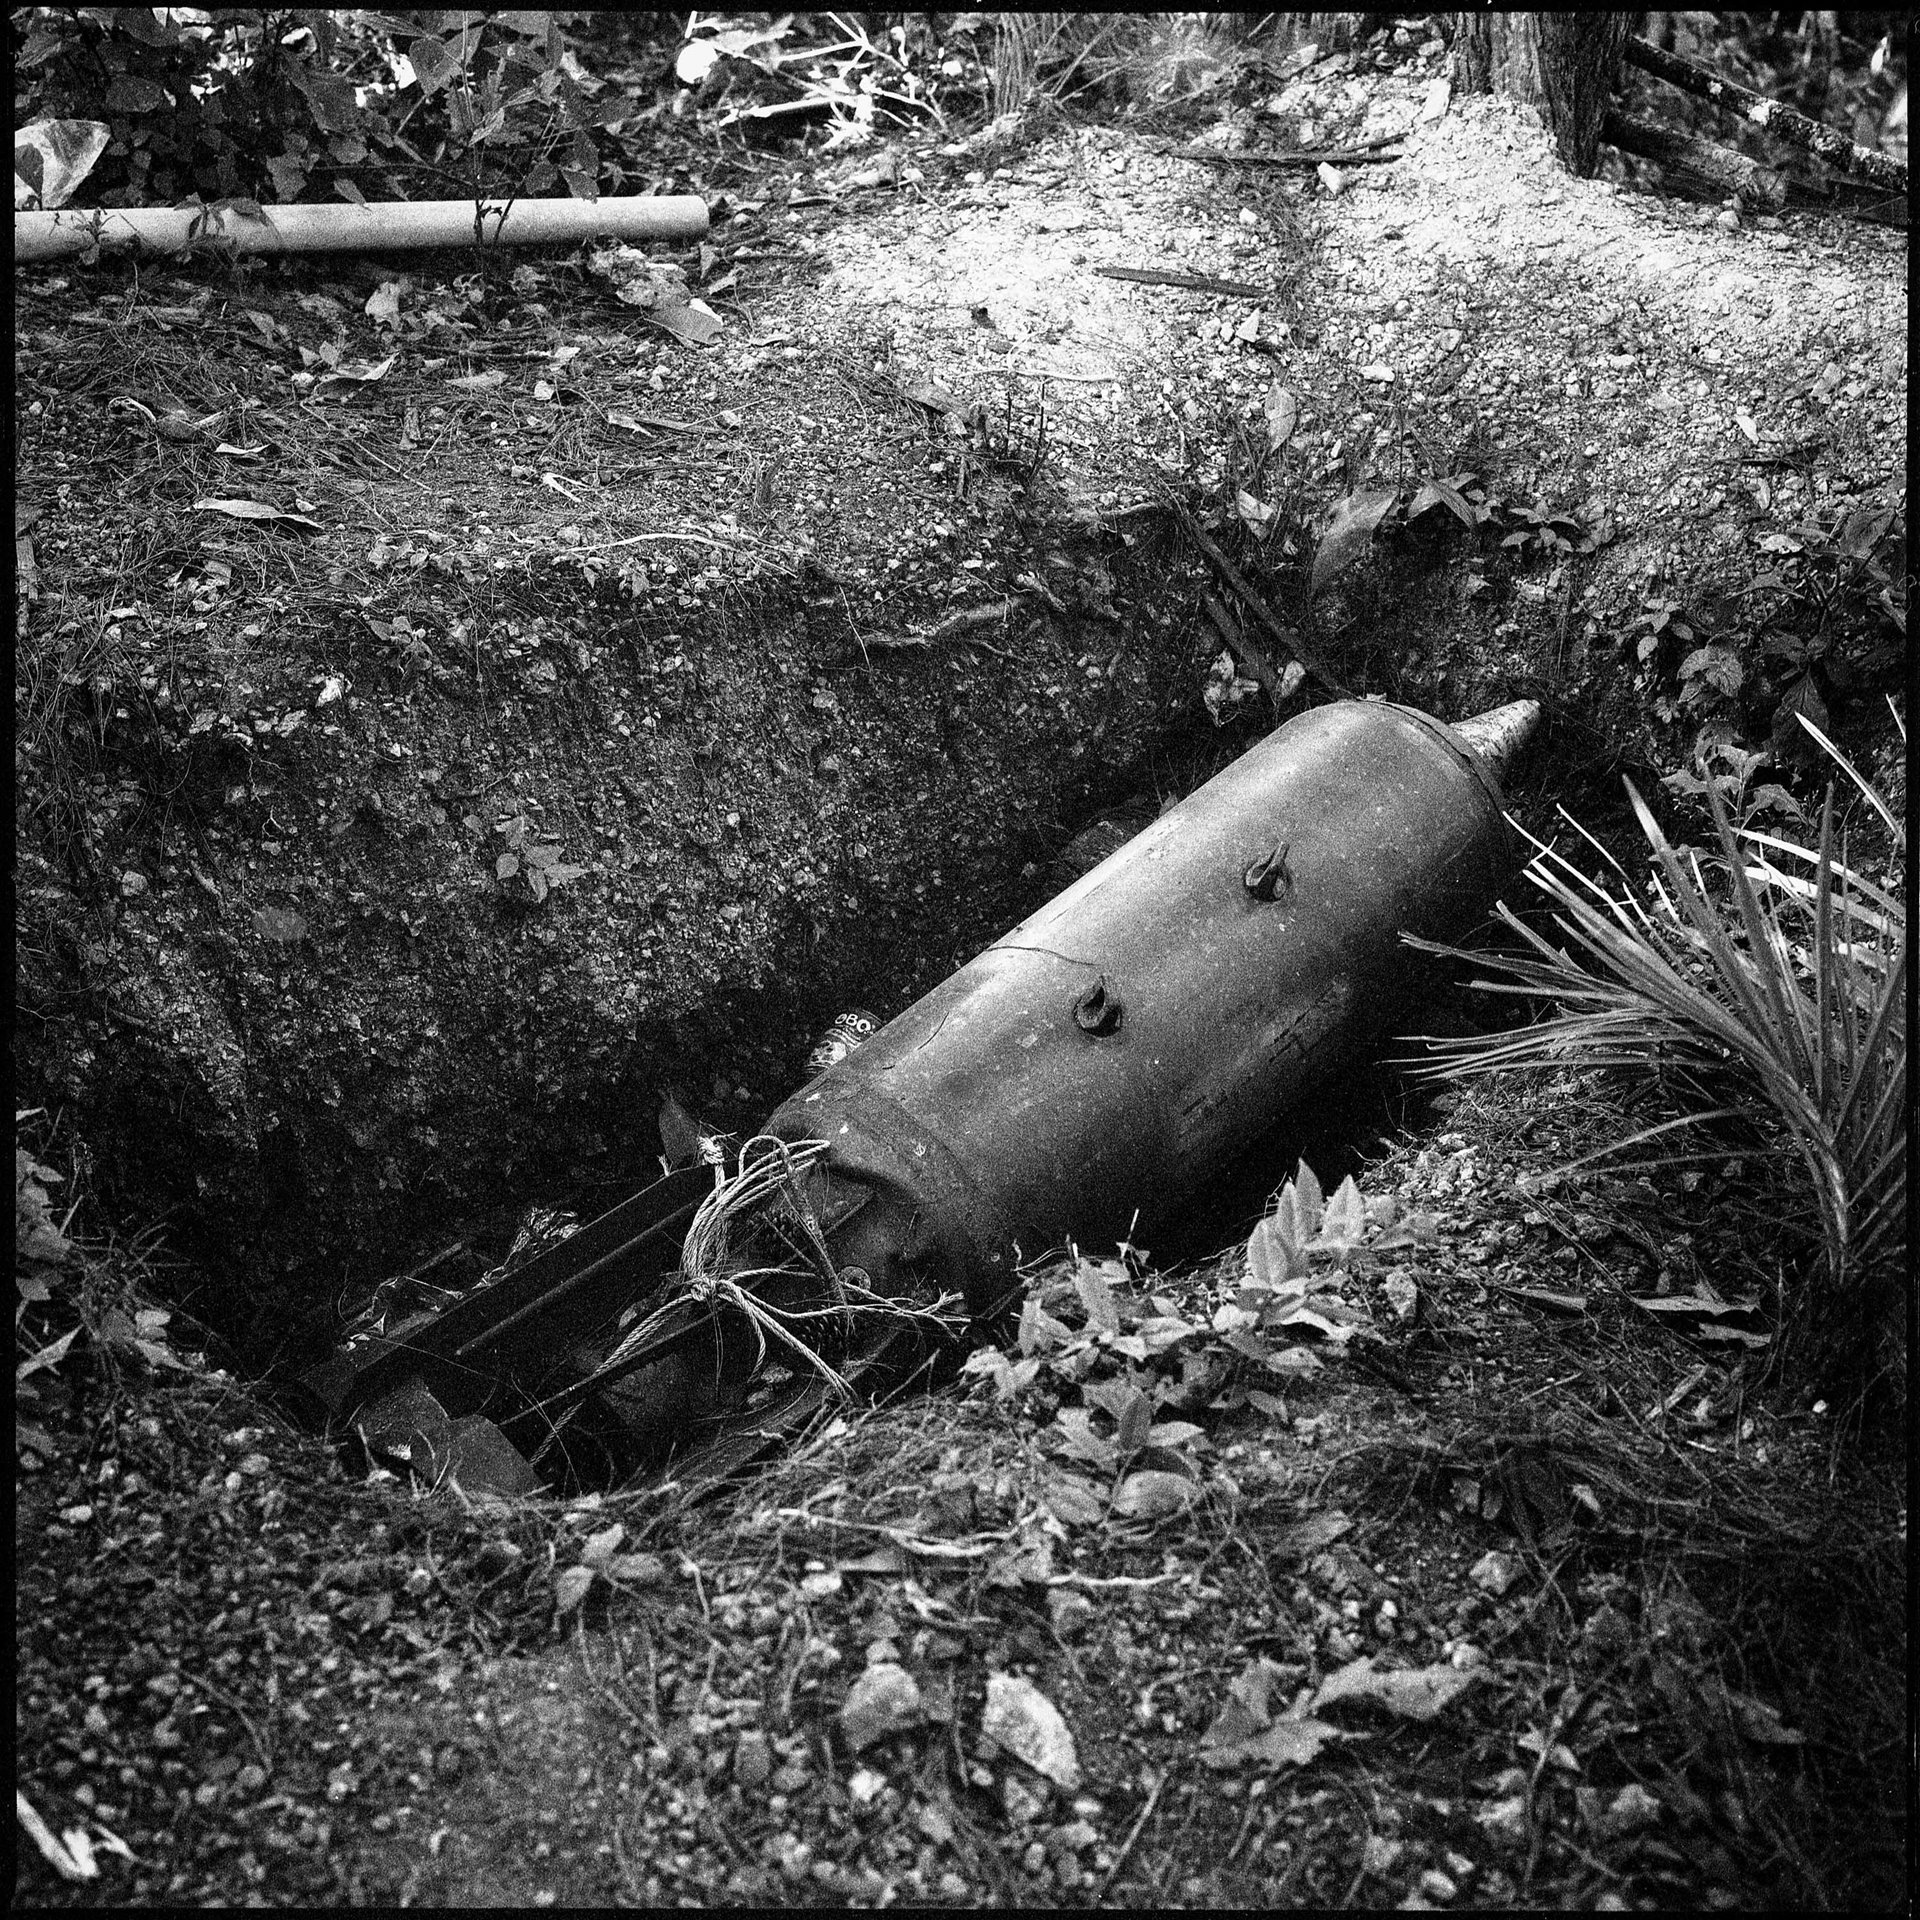 An unexploded bomb, dropped by a Myanmar military warplane, is seen at a remote camp of the Karenni Nationalities Defence Force (KNDF) in Kayah (Karenni) State. Between February 2021 and September 2022, 157 civilians were killed and 395 injured by such unexploded ordnance and landmines in Myanmar, according to <em>The Landmine Monitor Report </em>2022. About one-third of the casualties were children.